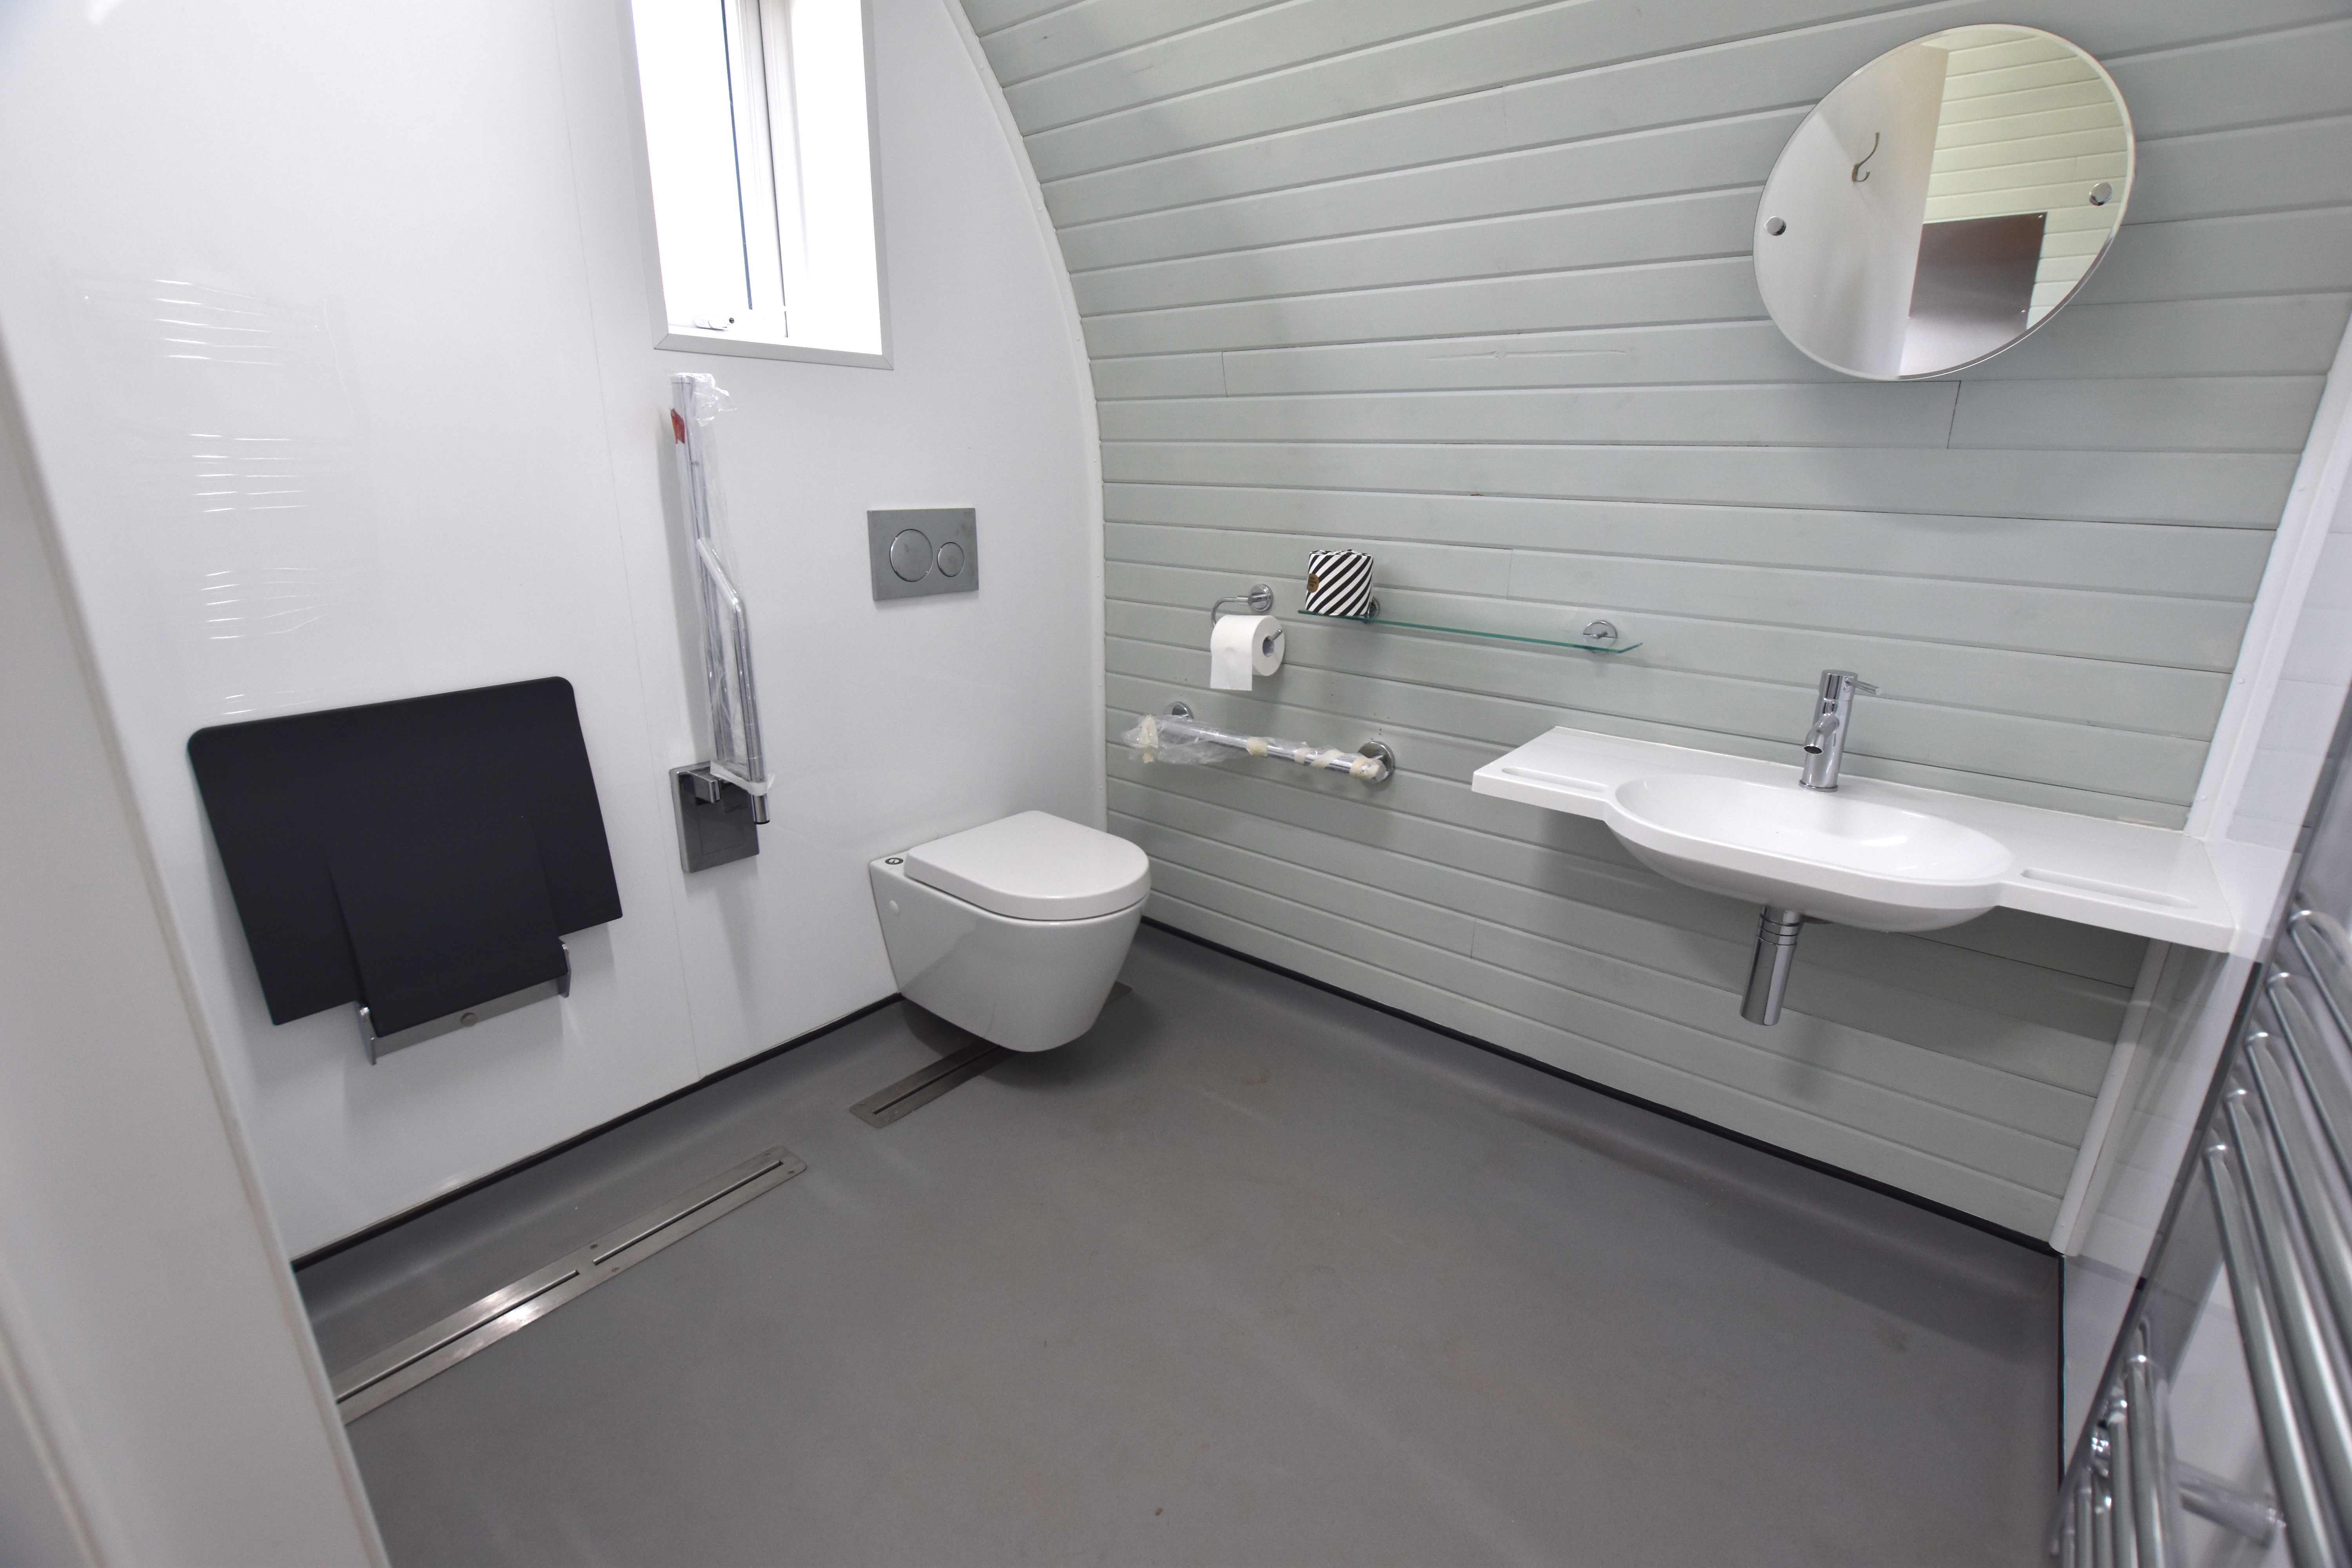 Accessible OmniPod bathroom featuring curved grey painted wood clad wall, wall-mounted basin with integrated handgrips, toilet, and shower seat with grab rails.